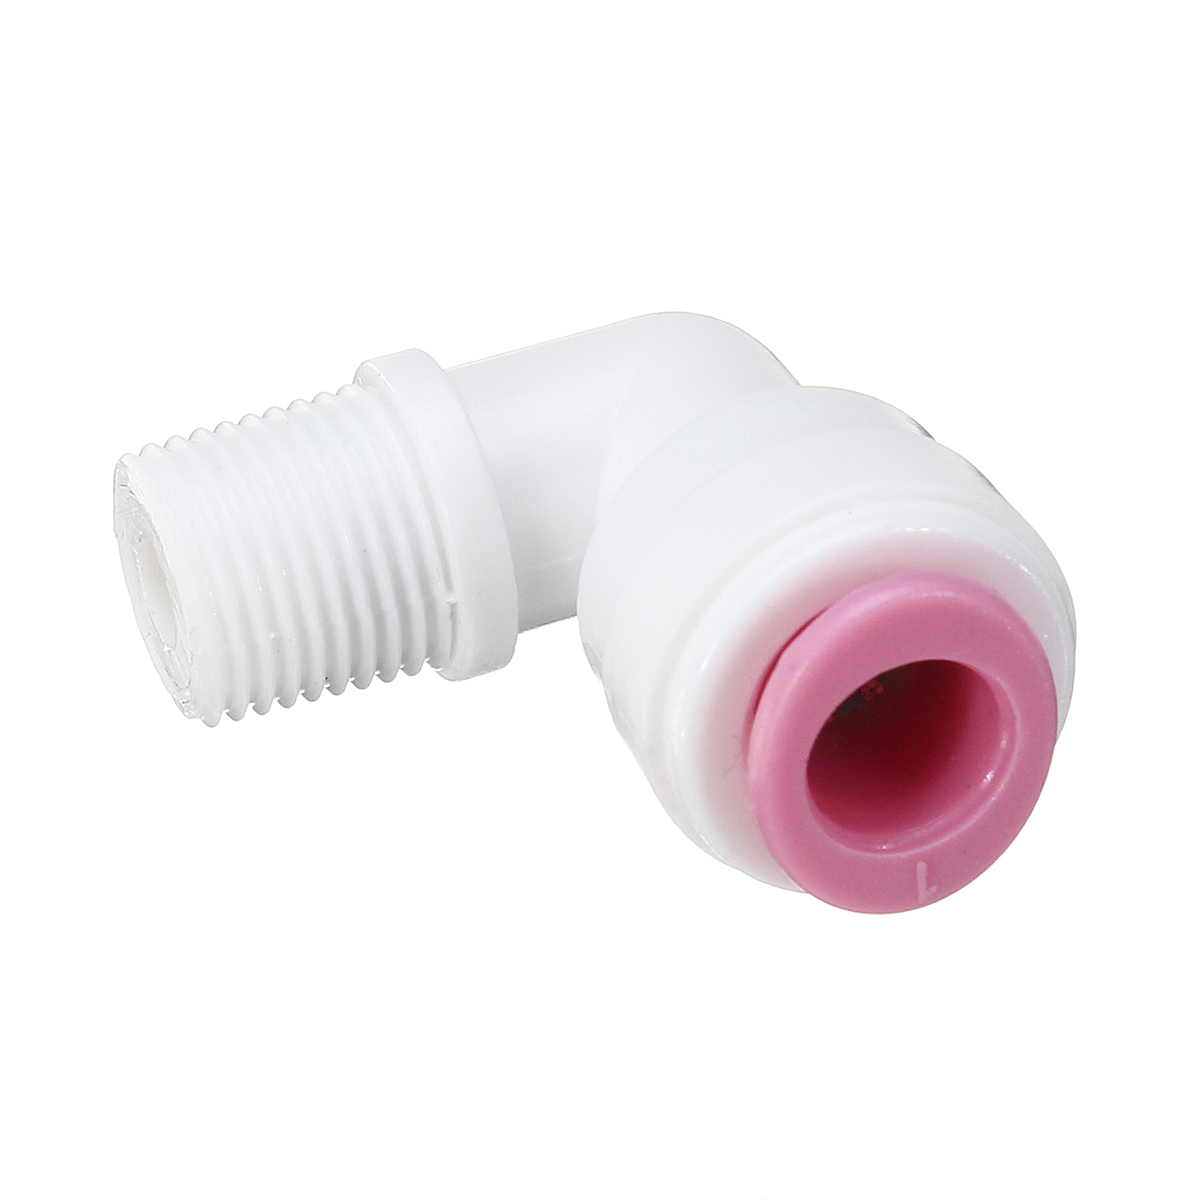 14-18-Inch-RO-Grade-Water-Pipes-Fittings-Quick-Connect-Push-In-to-Connect-Water-Pipe-1378099